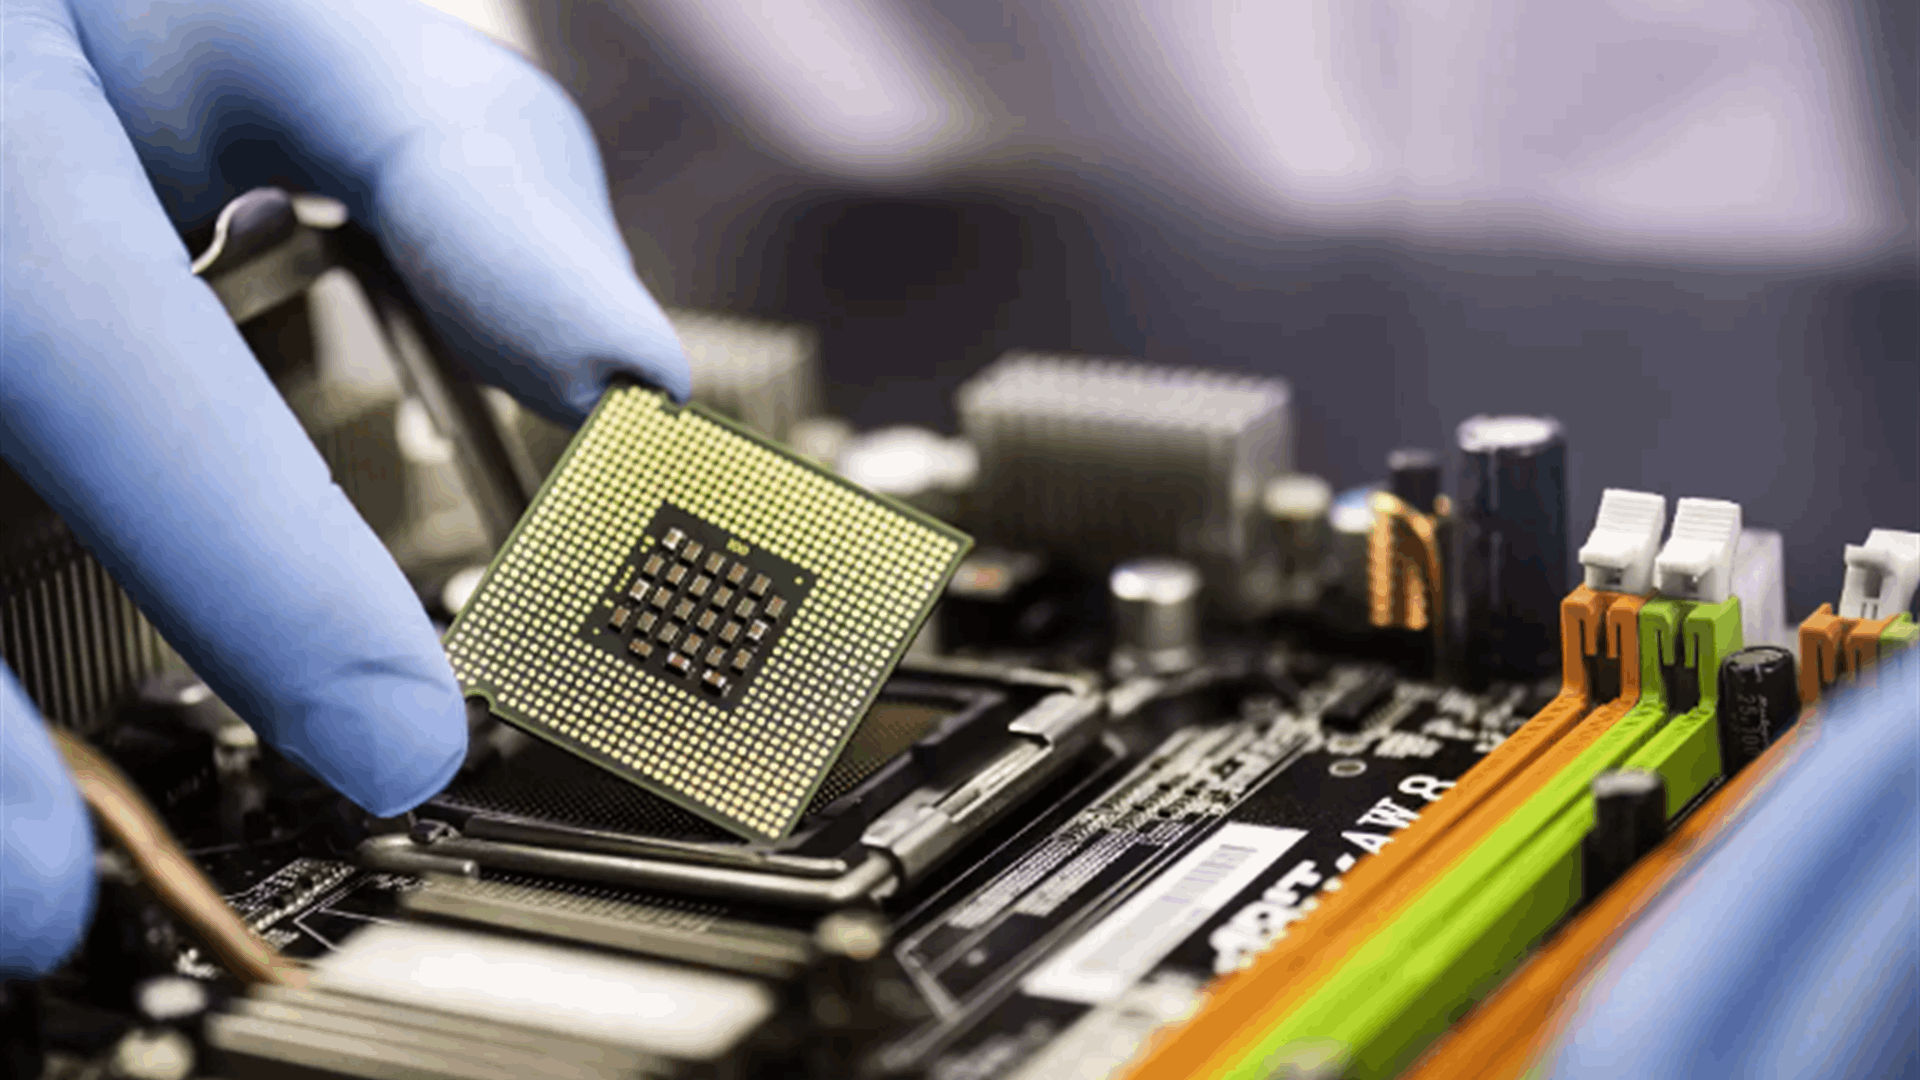 Japan-backed fund offers $6.2 bln to buy chip firm JSR